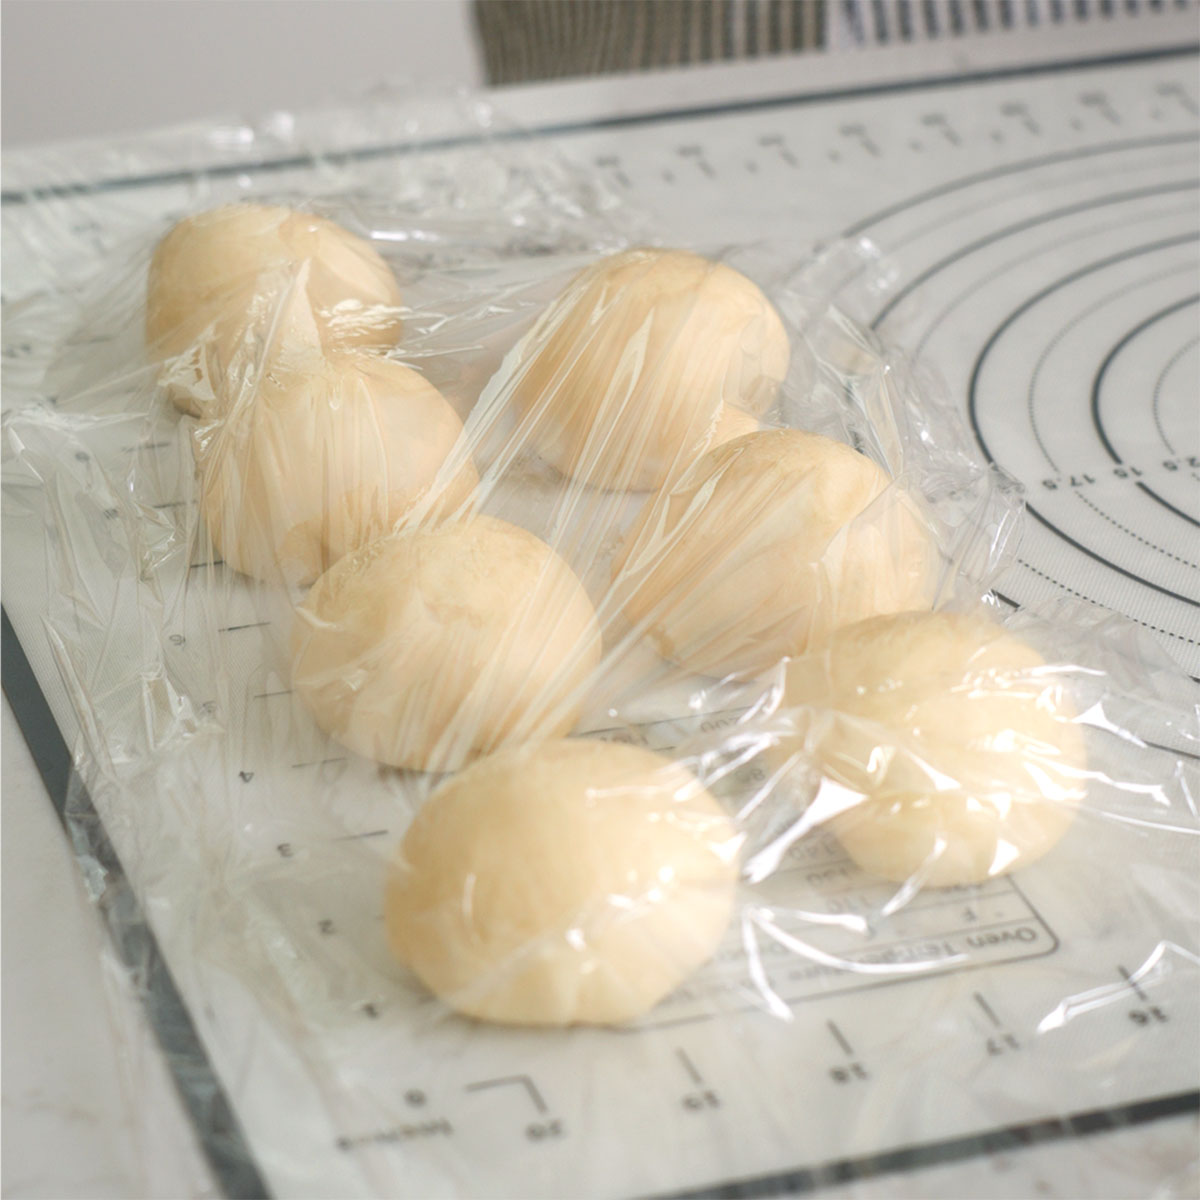 Balls of dough waiting until a layer of plastic wrap.